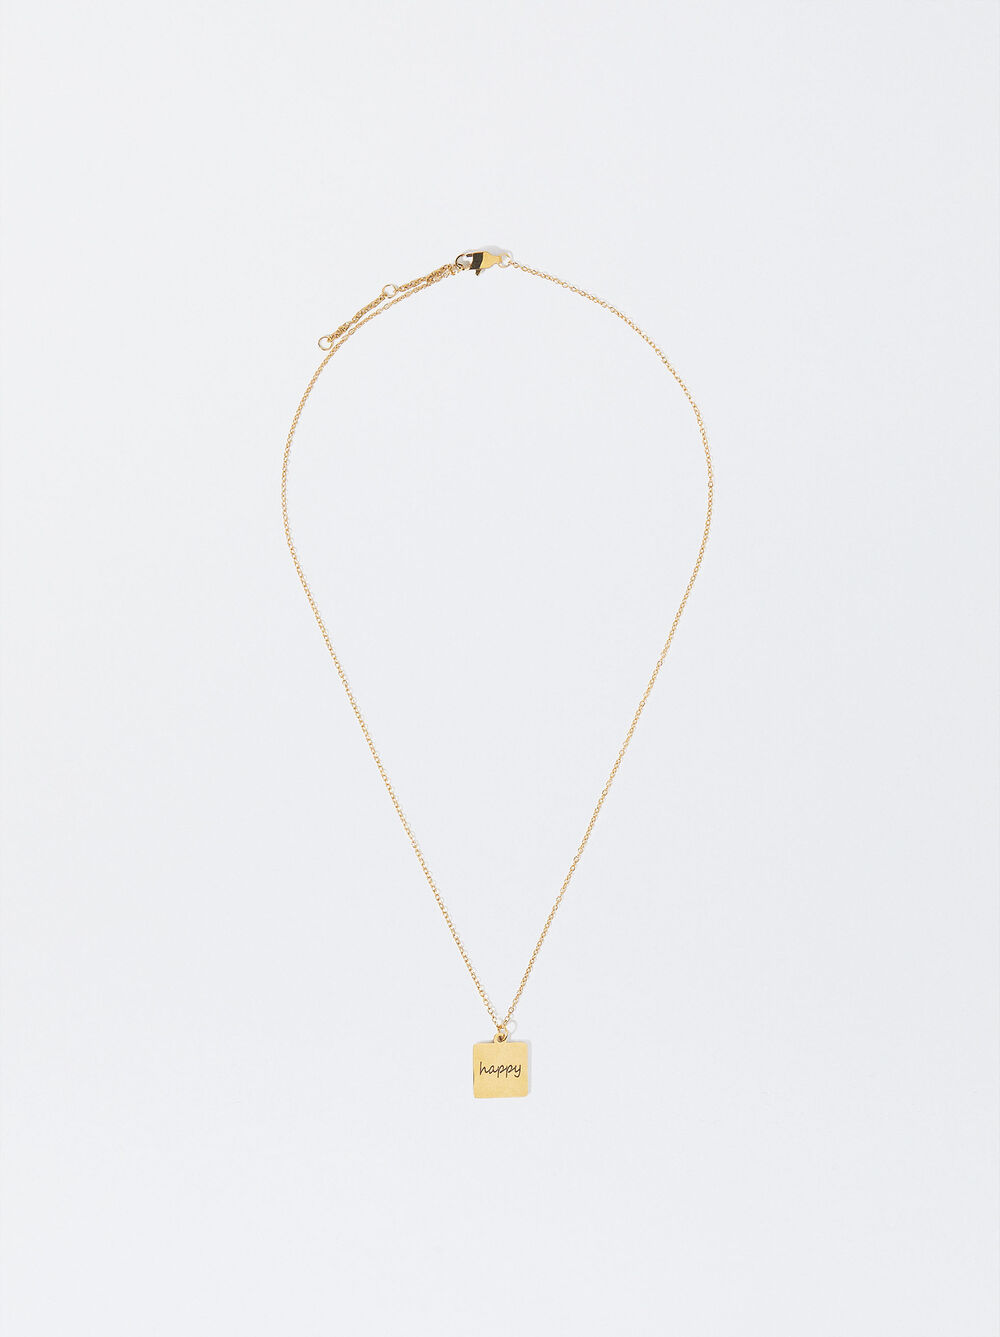 Online Exclusive - Gold Stainless Steel Necklace With Personalized Pendant